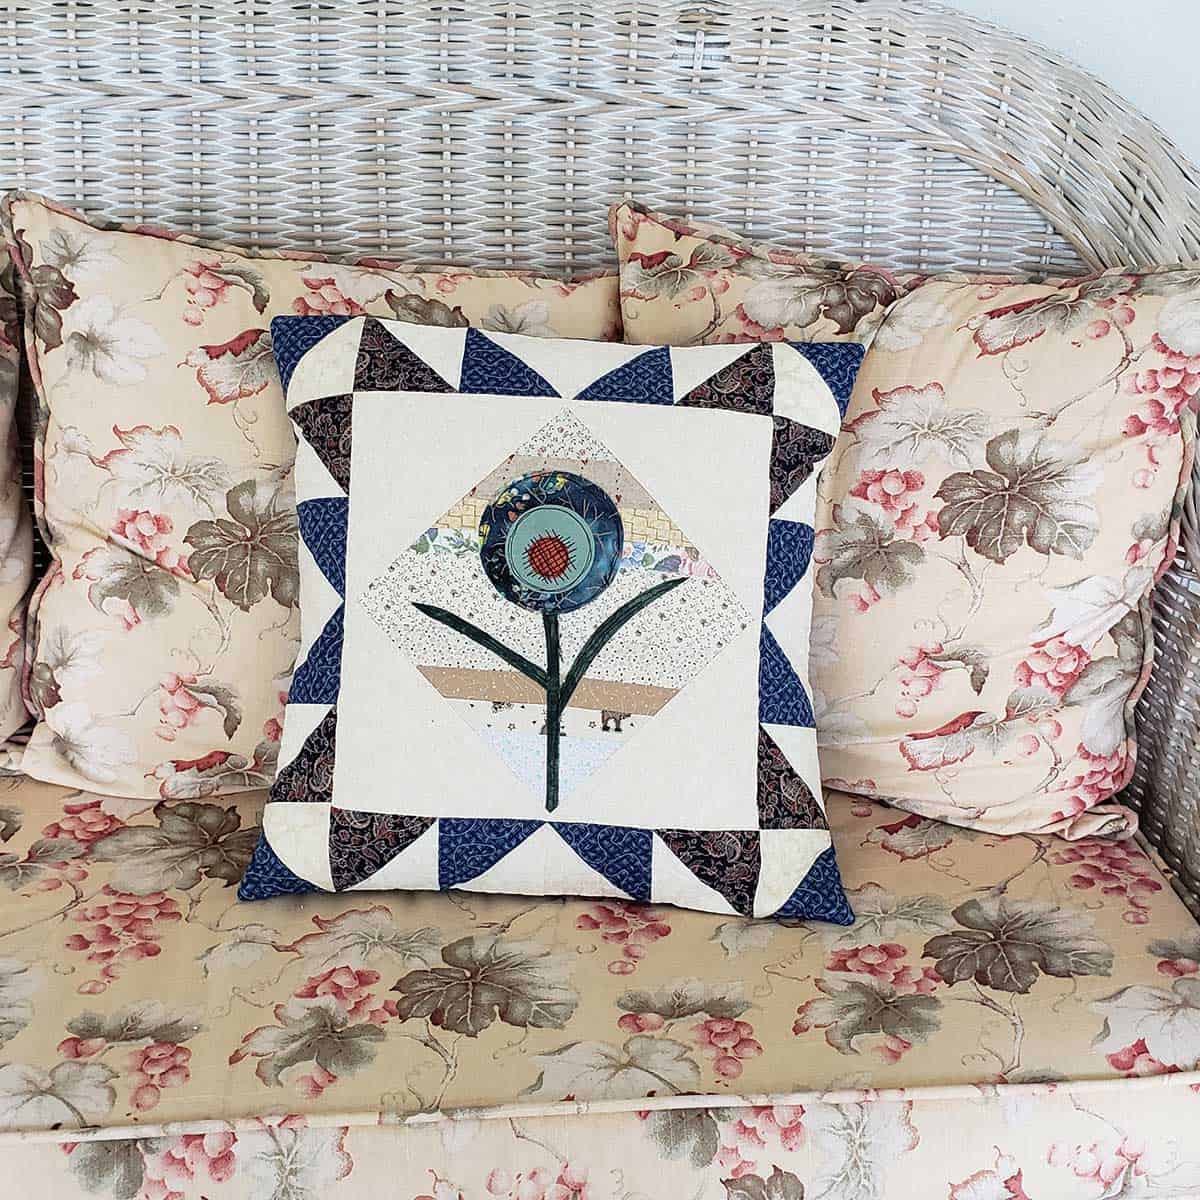 18 inch Applique Flower Pillow on couch